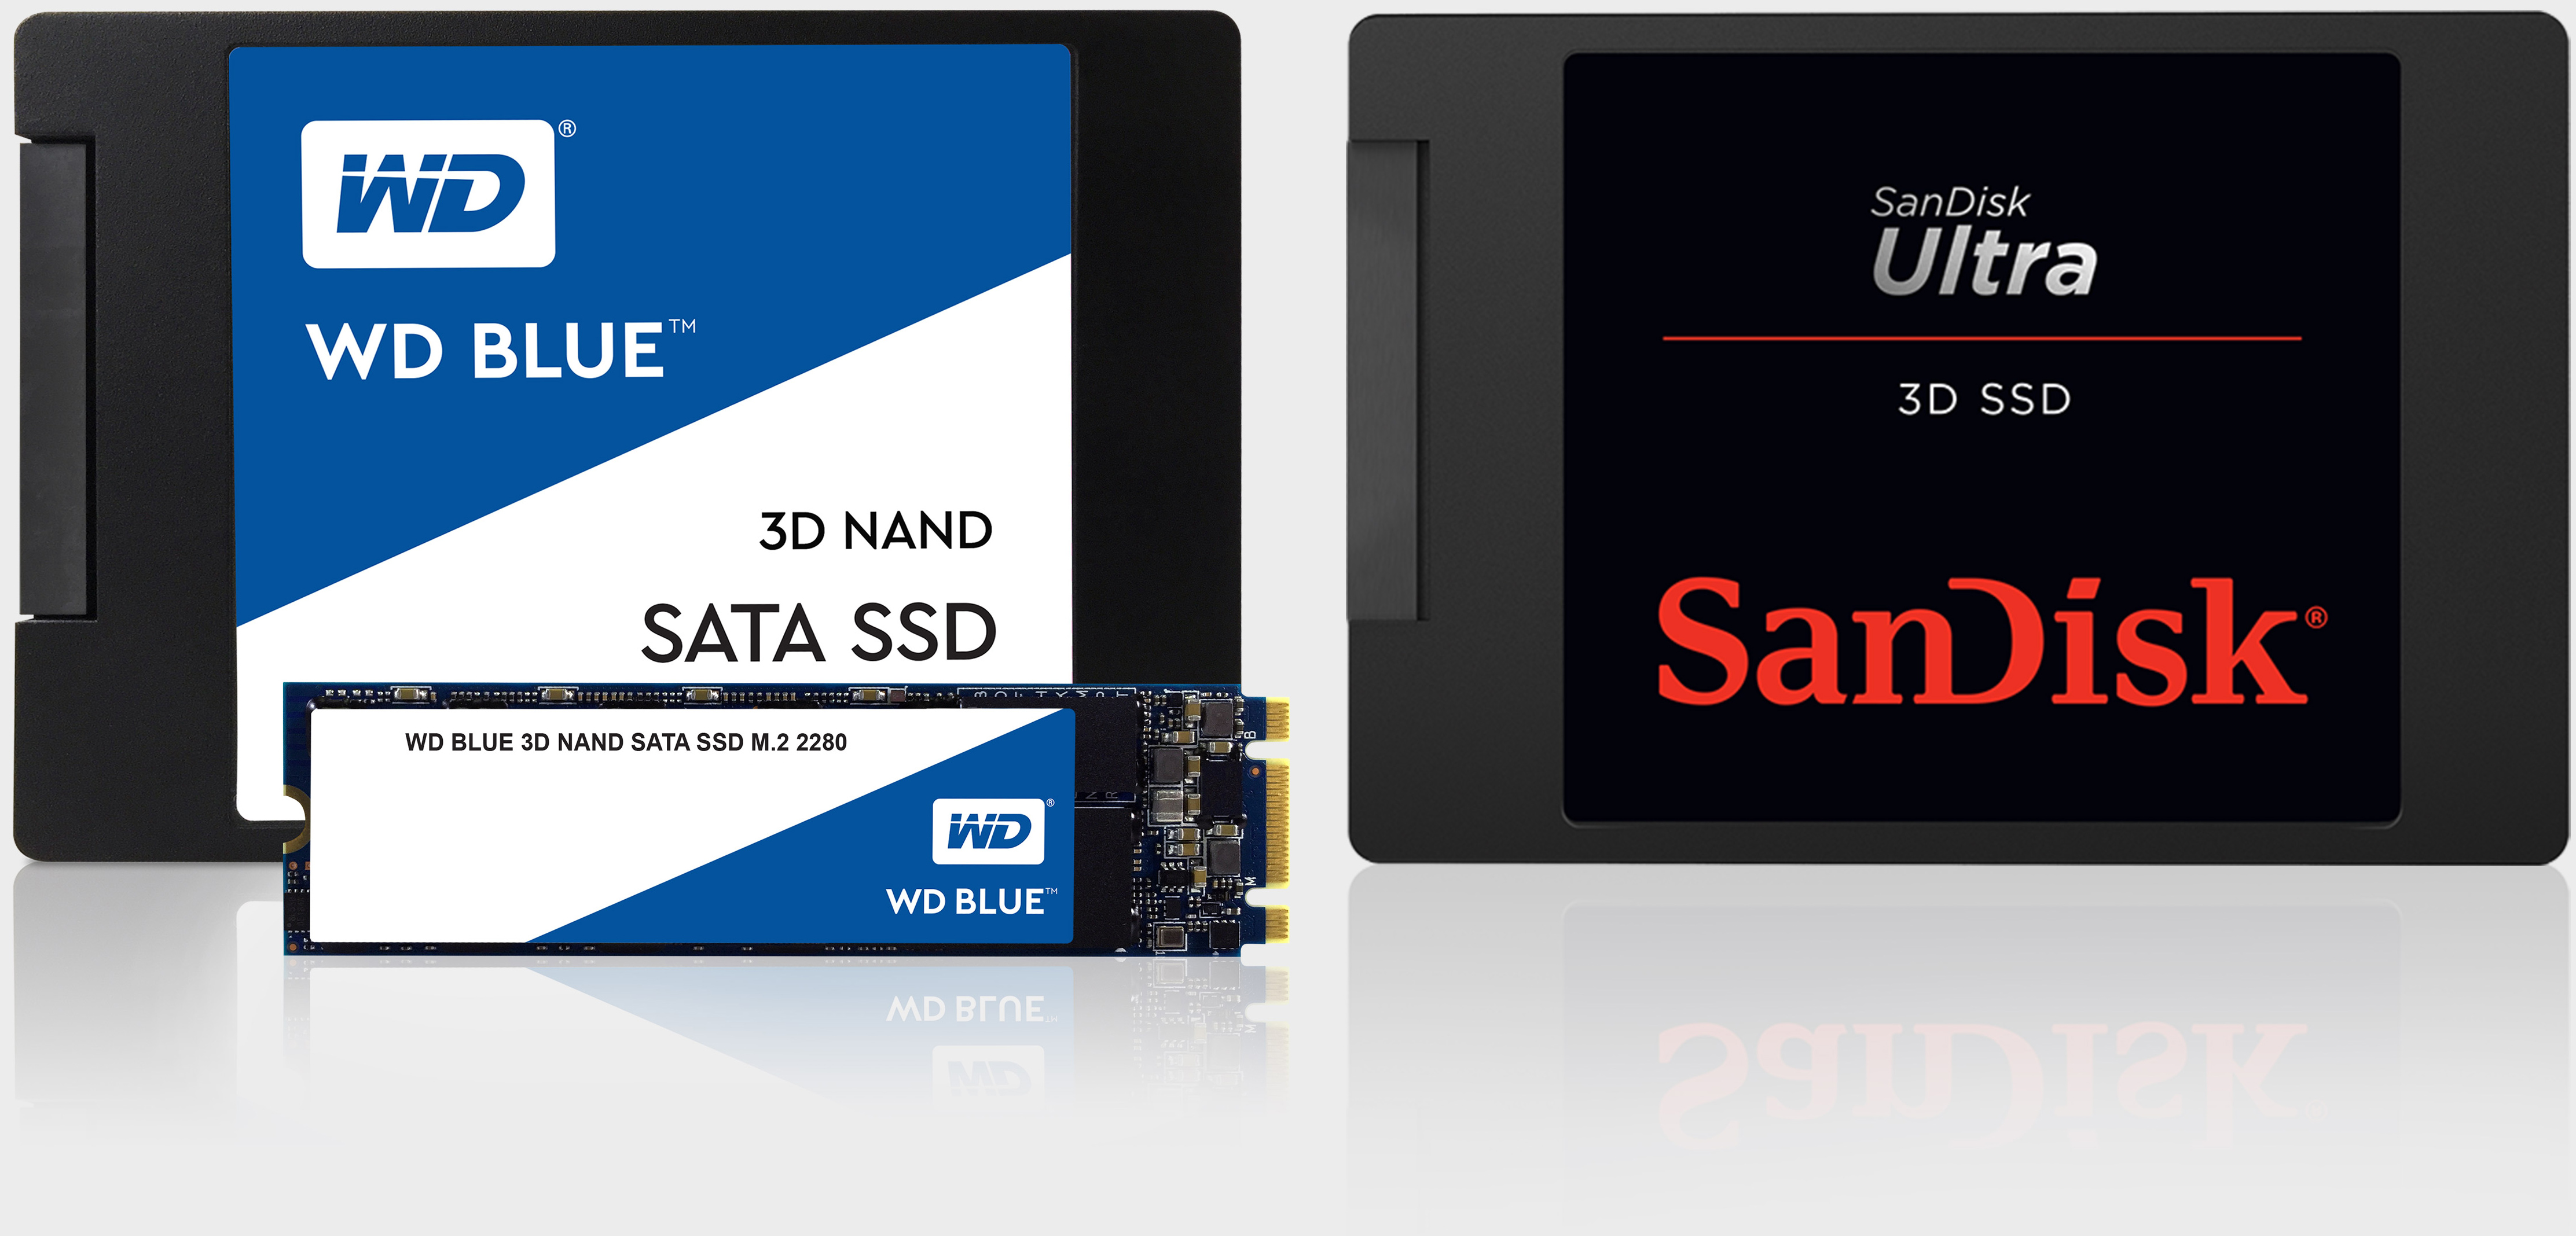 Wd Blue 3d Nand Sata And Sandisk Ultra 3d Ssds Launched 3d Tlc Nand Sata Marvell